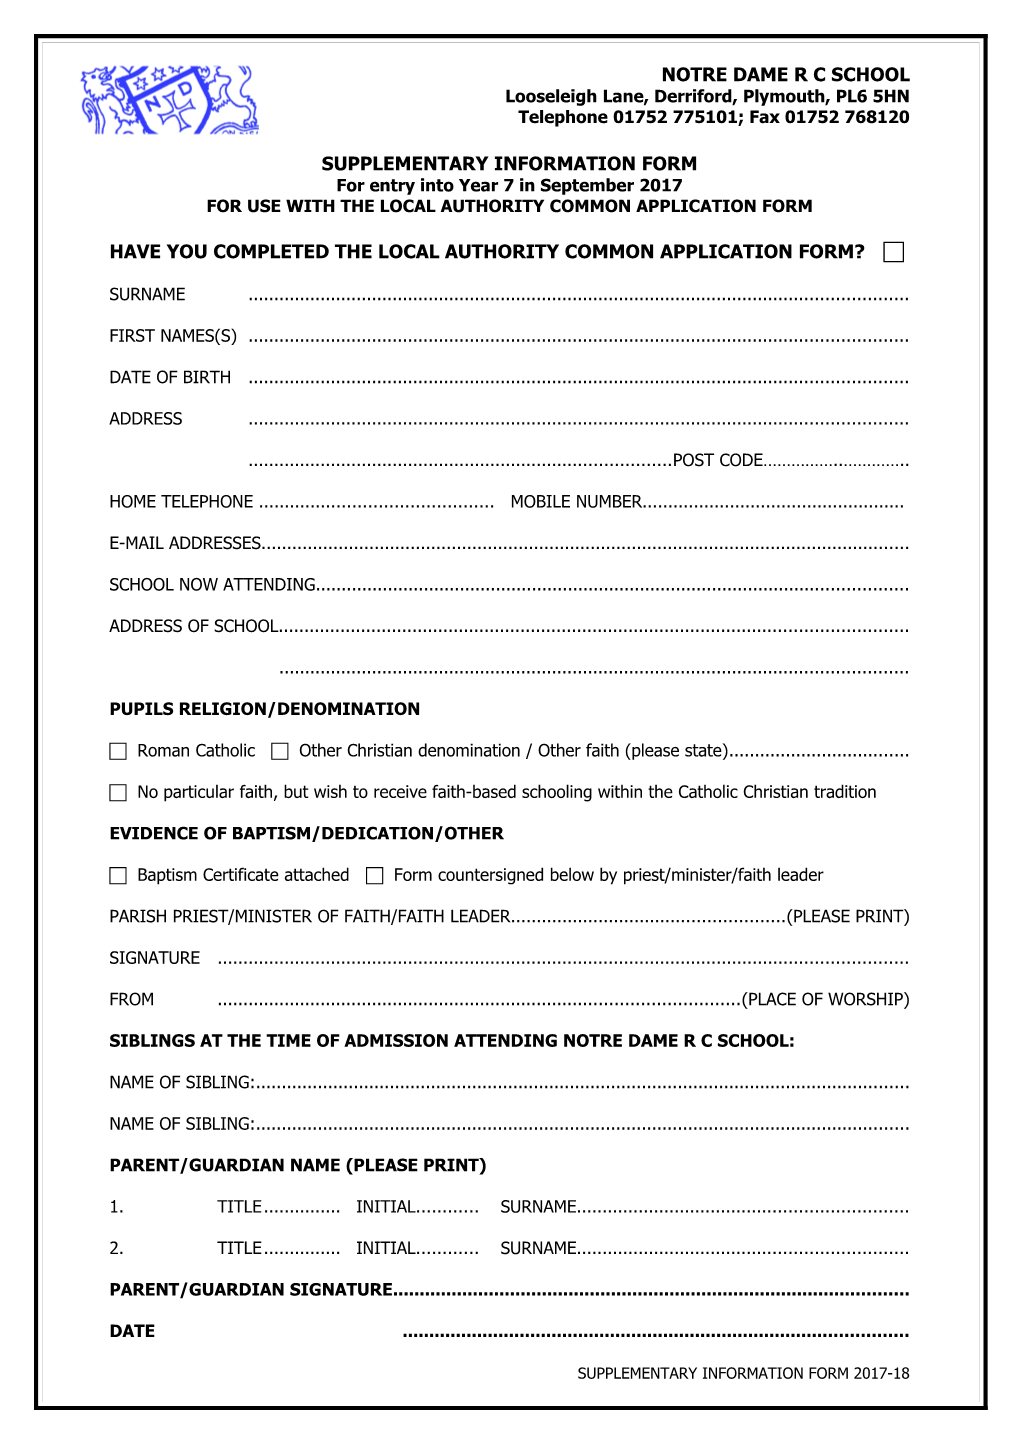 Application for Entry to the School on 200